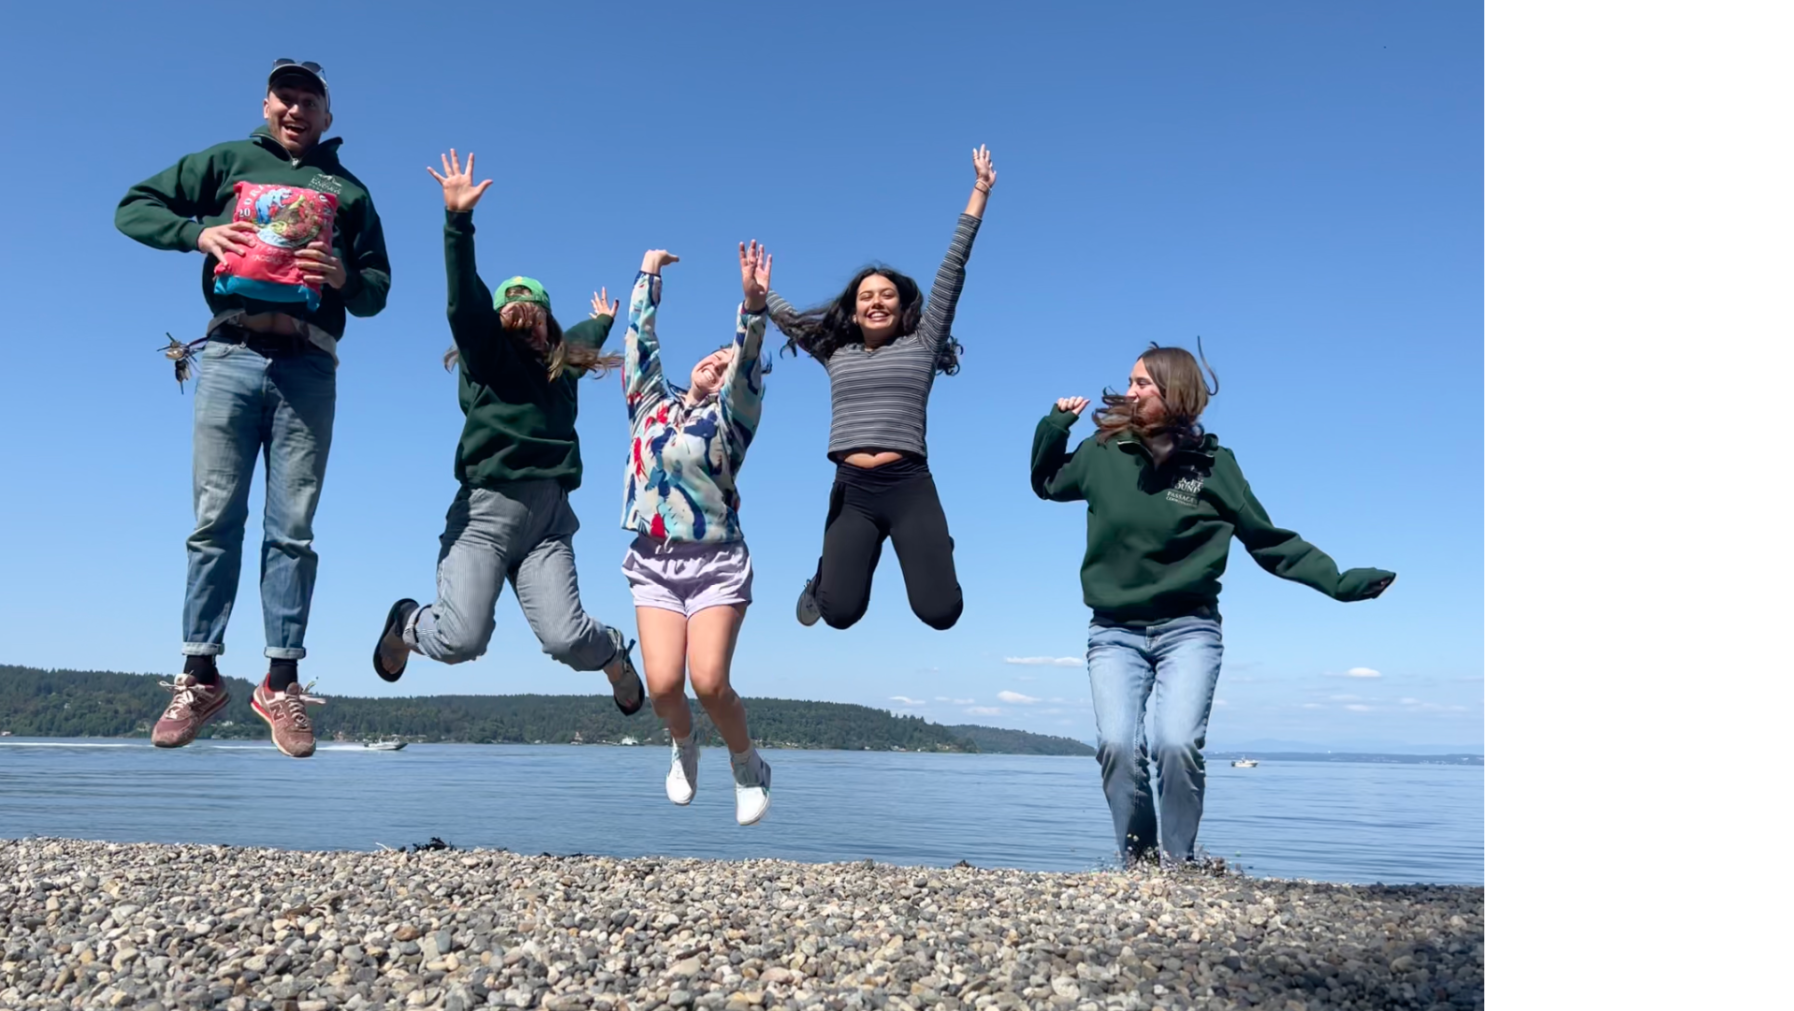 5 students jump into the air with the Puget Sound behind them.